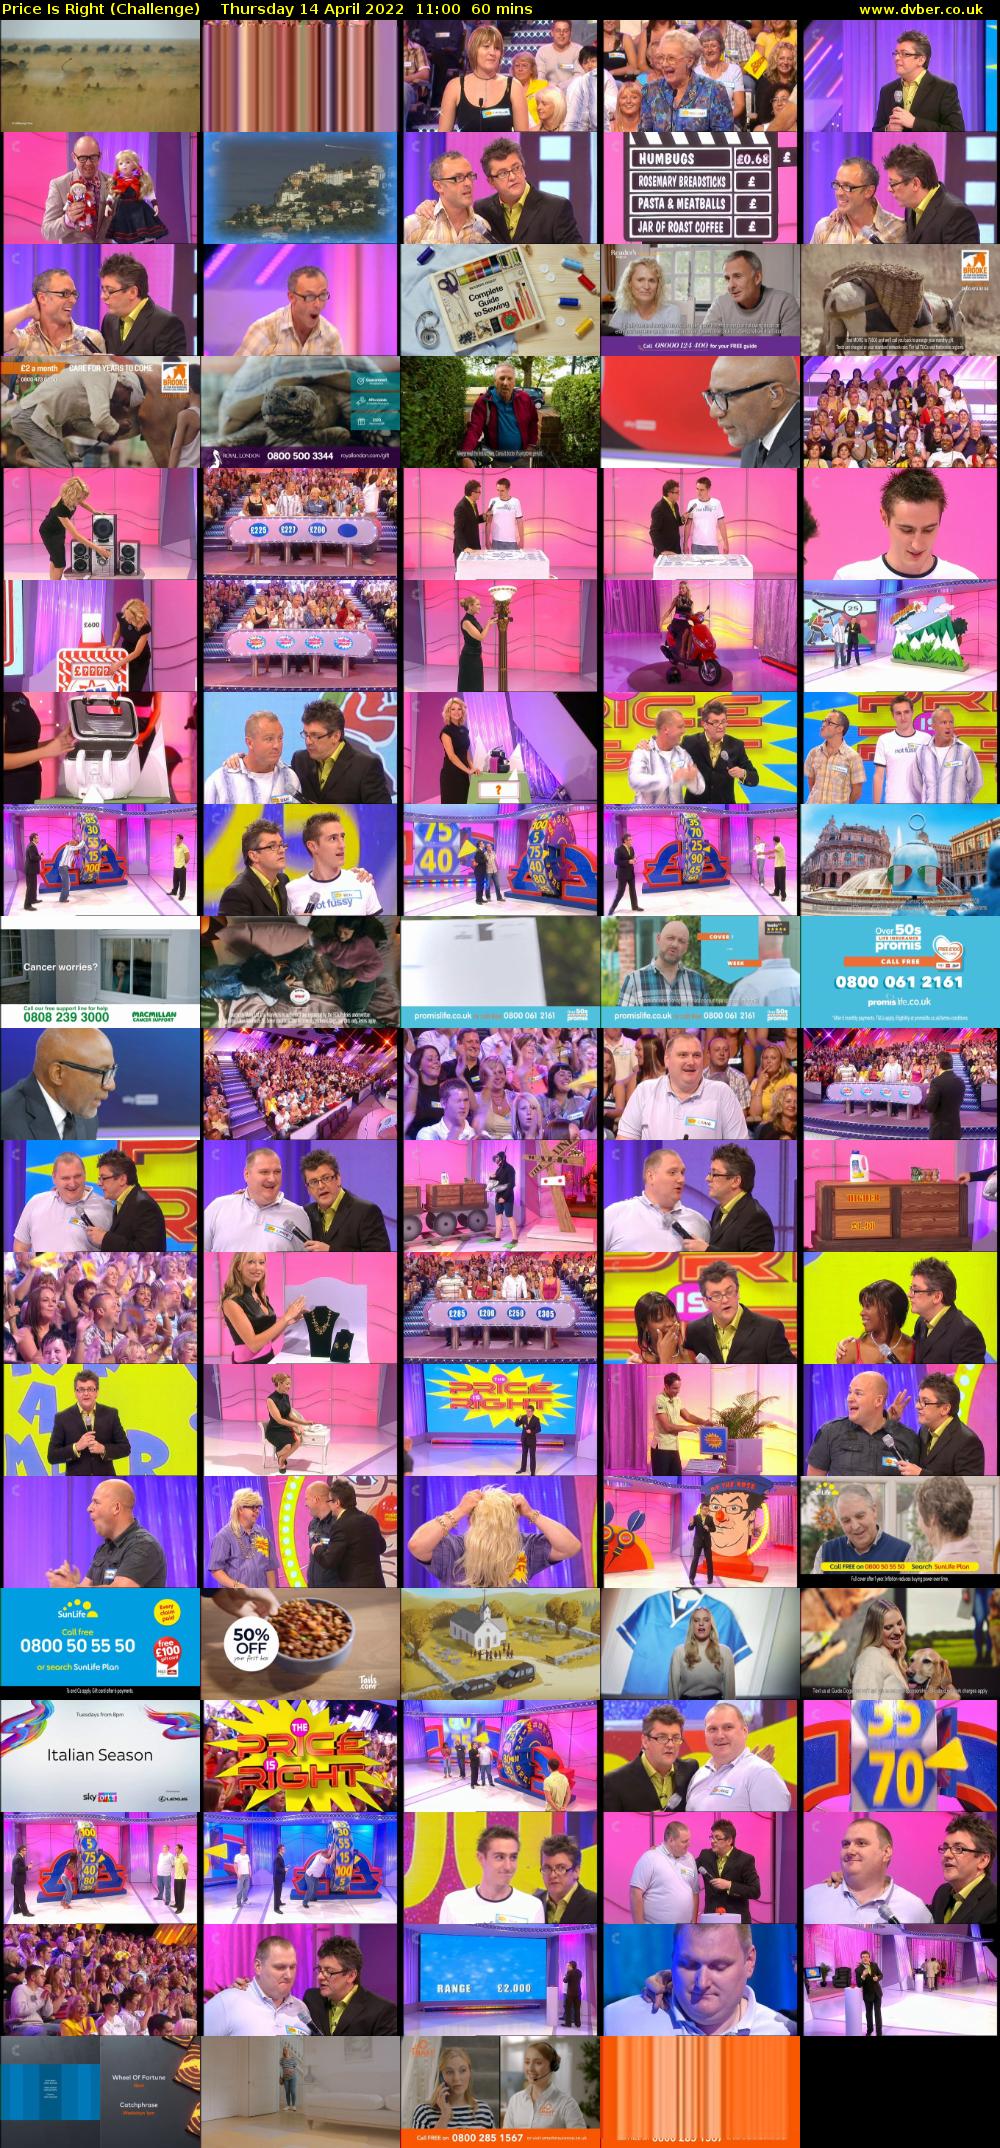 Price Is Right (Challenge) Thursday 14 April 2022 11:00 - 12:00